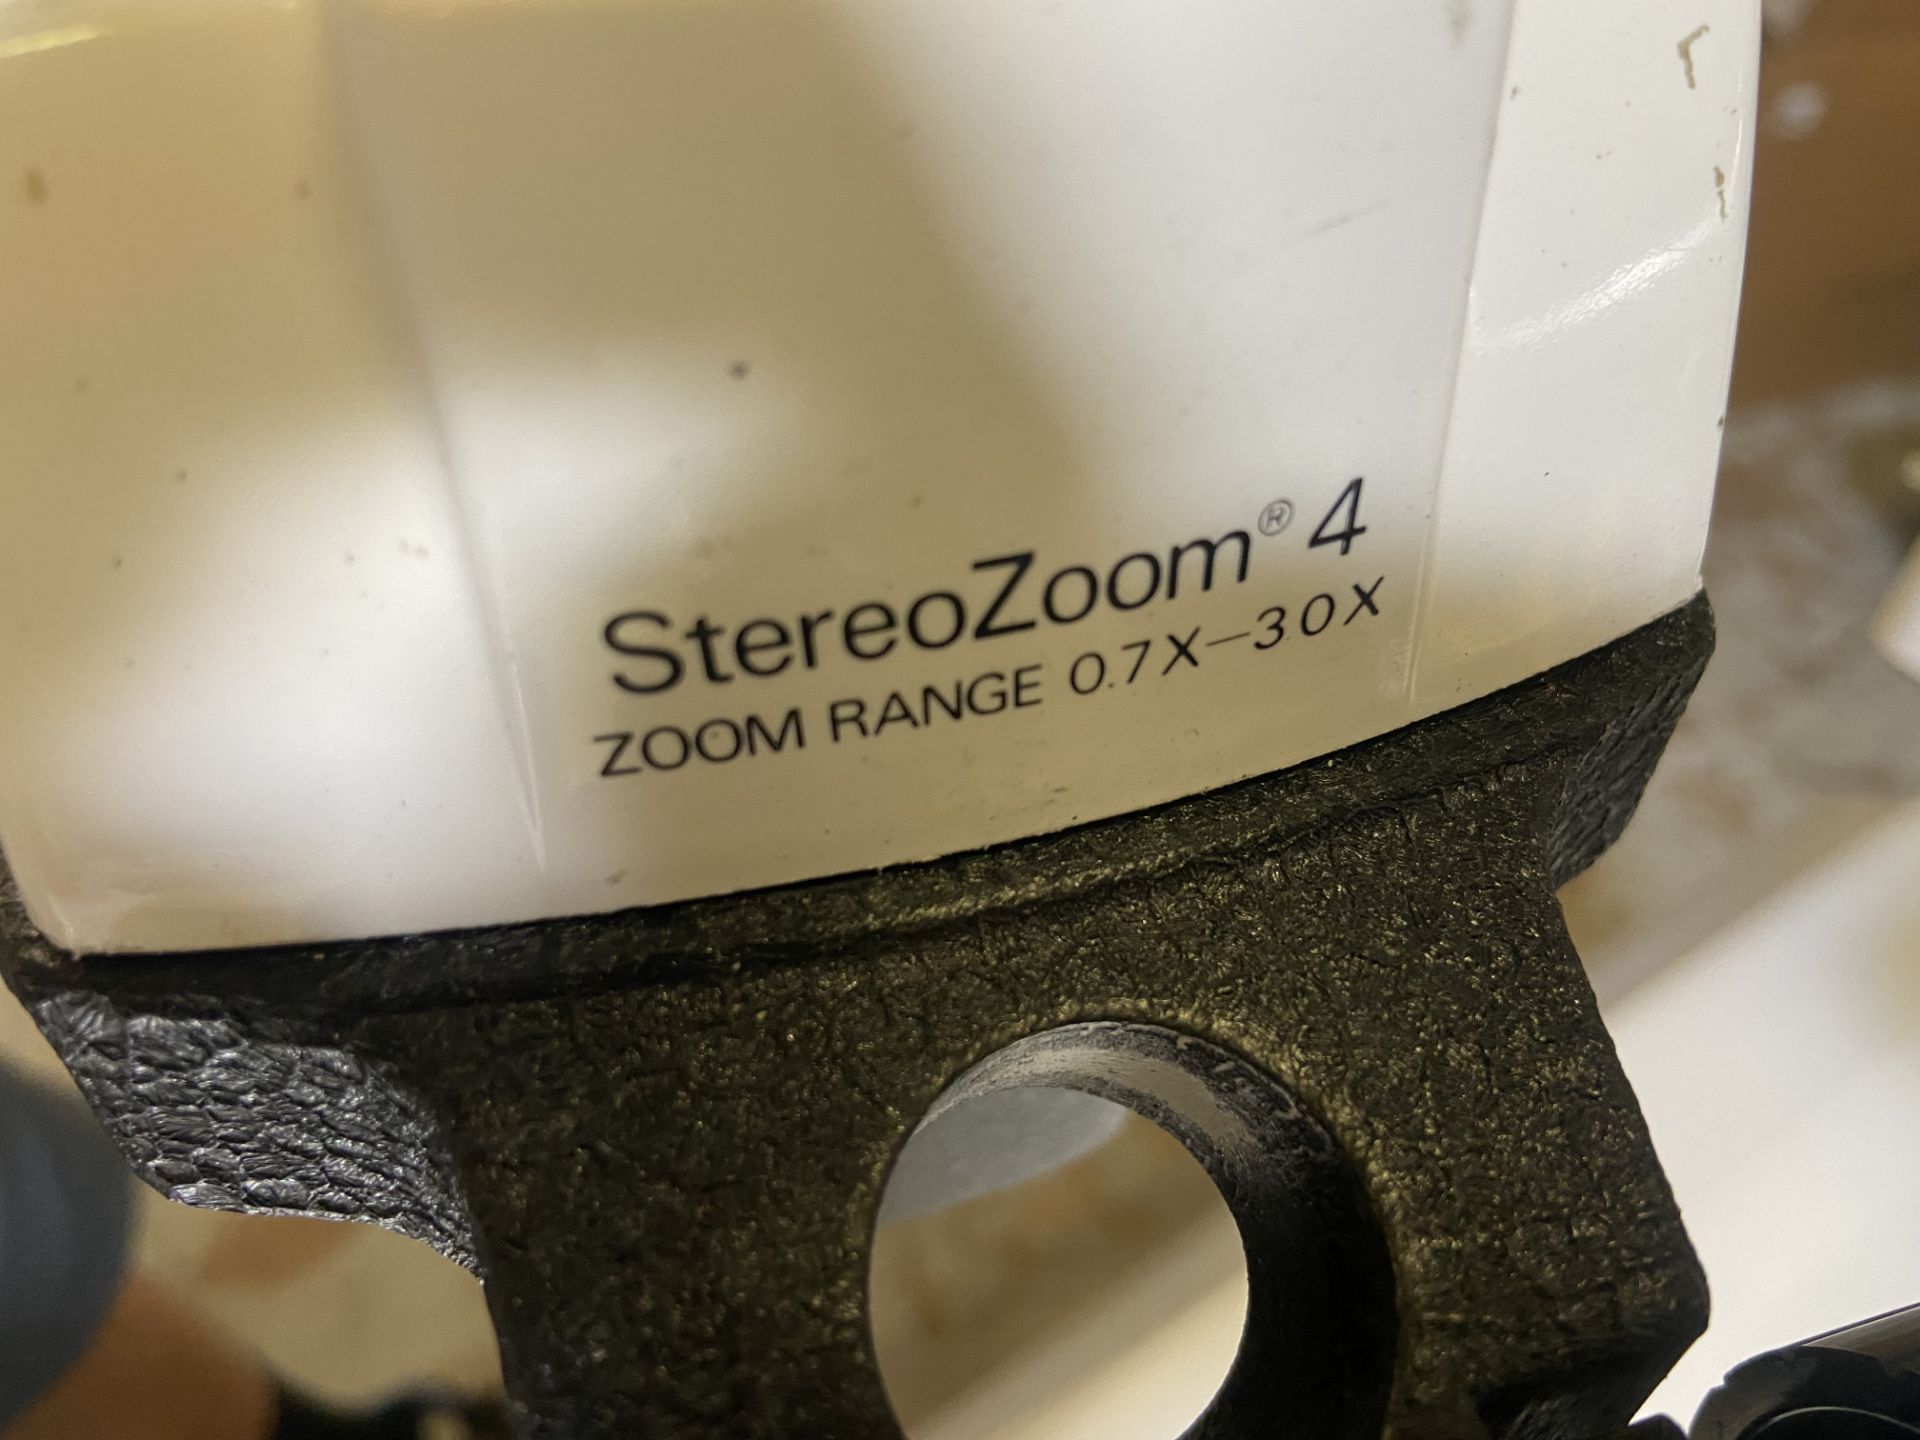 Microscope StereoZoom 4, 0.7X - 30X, Rigging Fee: $20 - Image 3 of 5